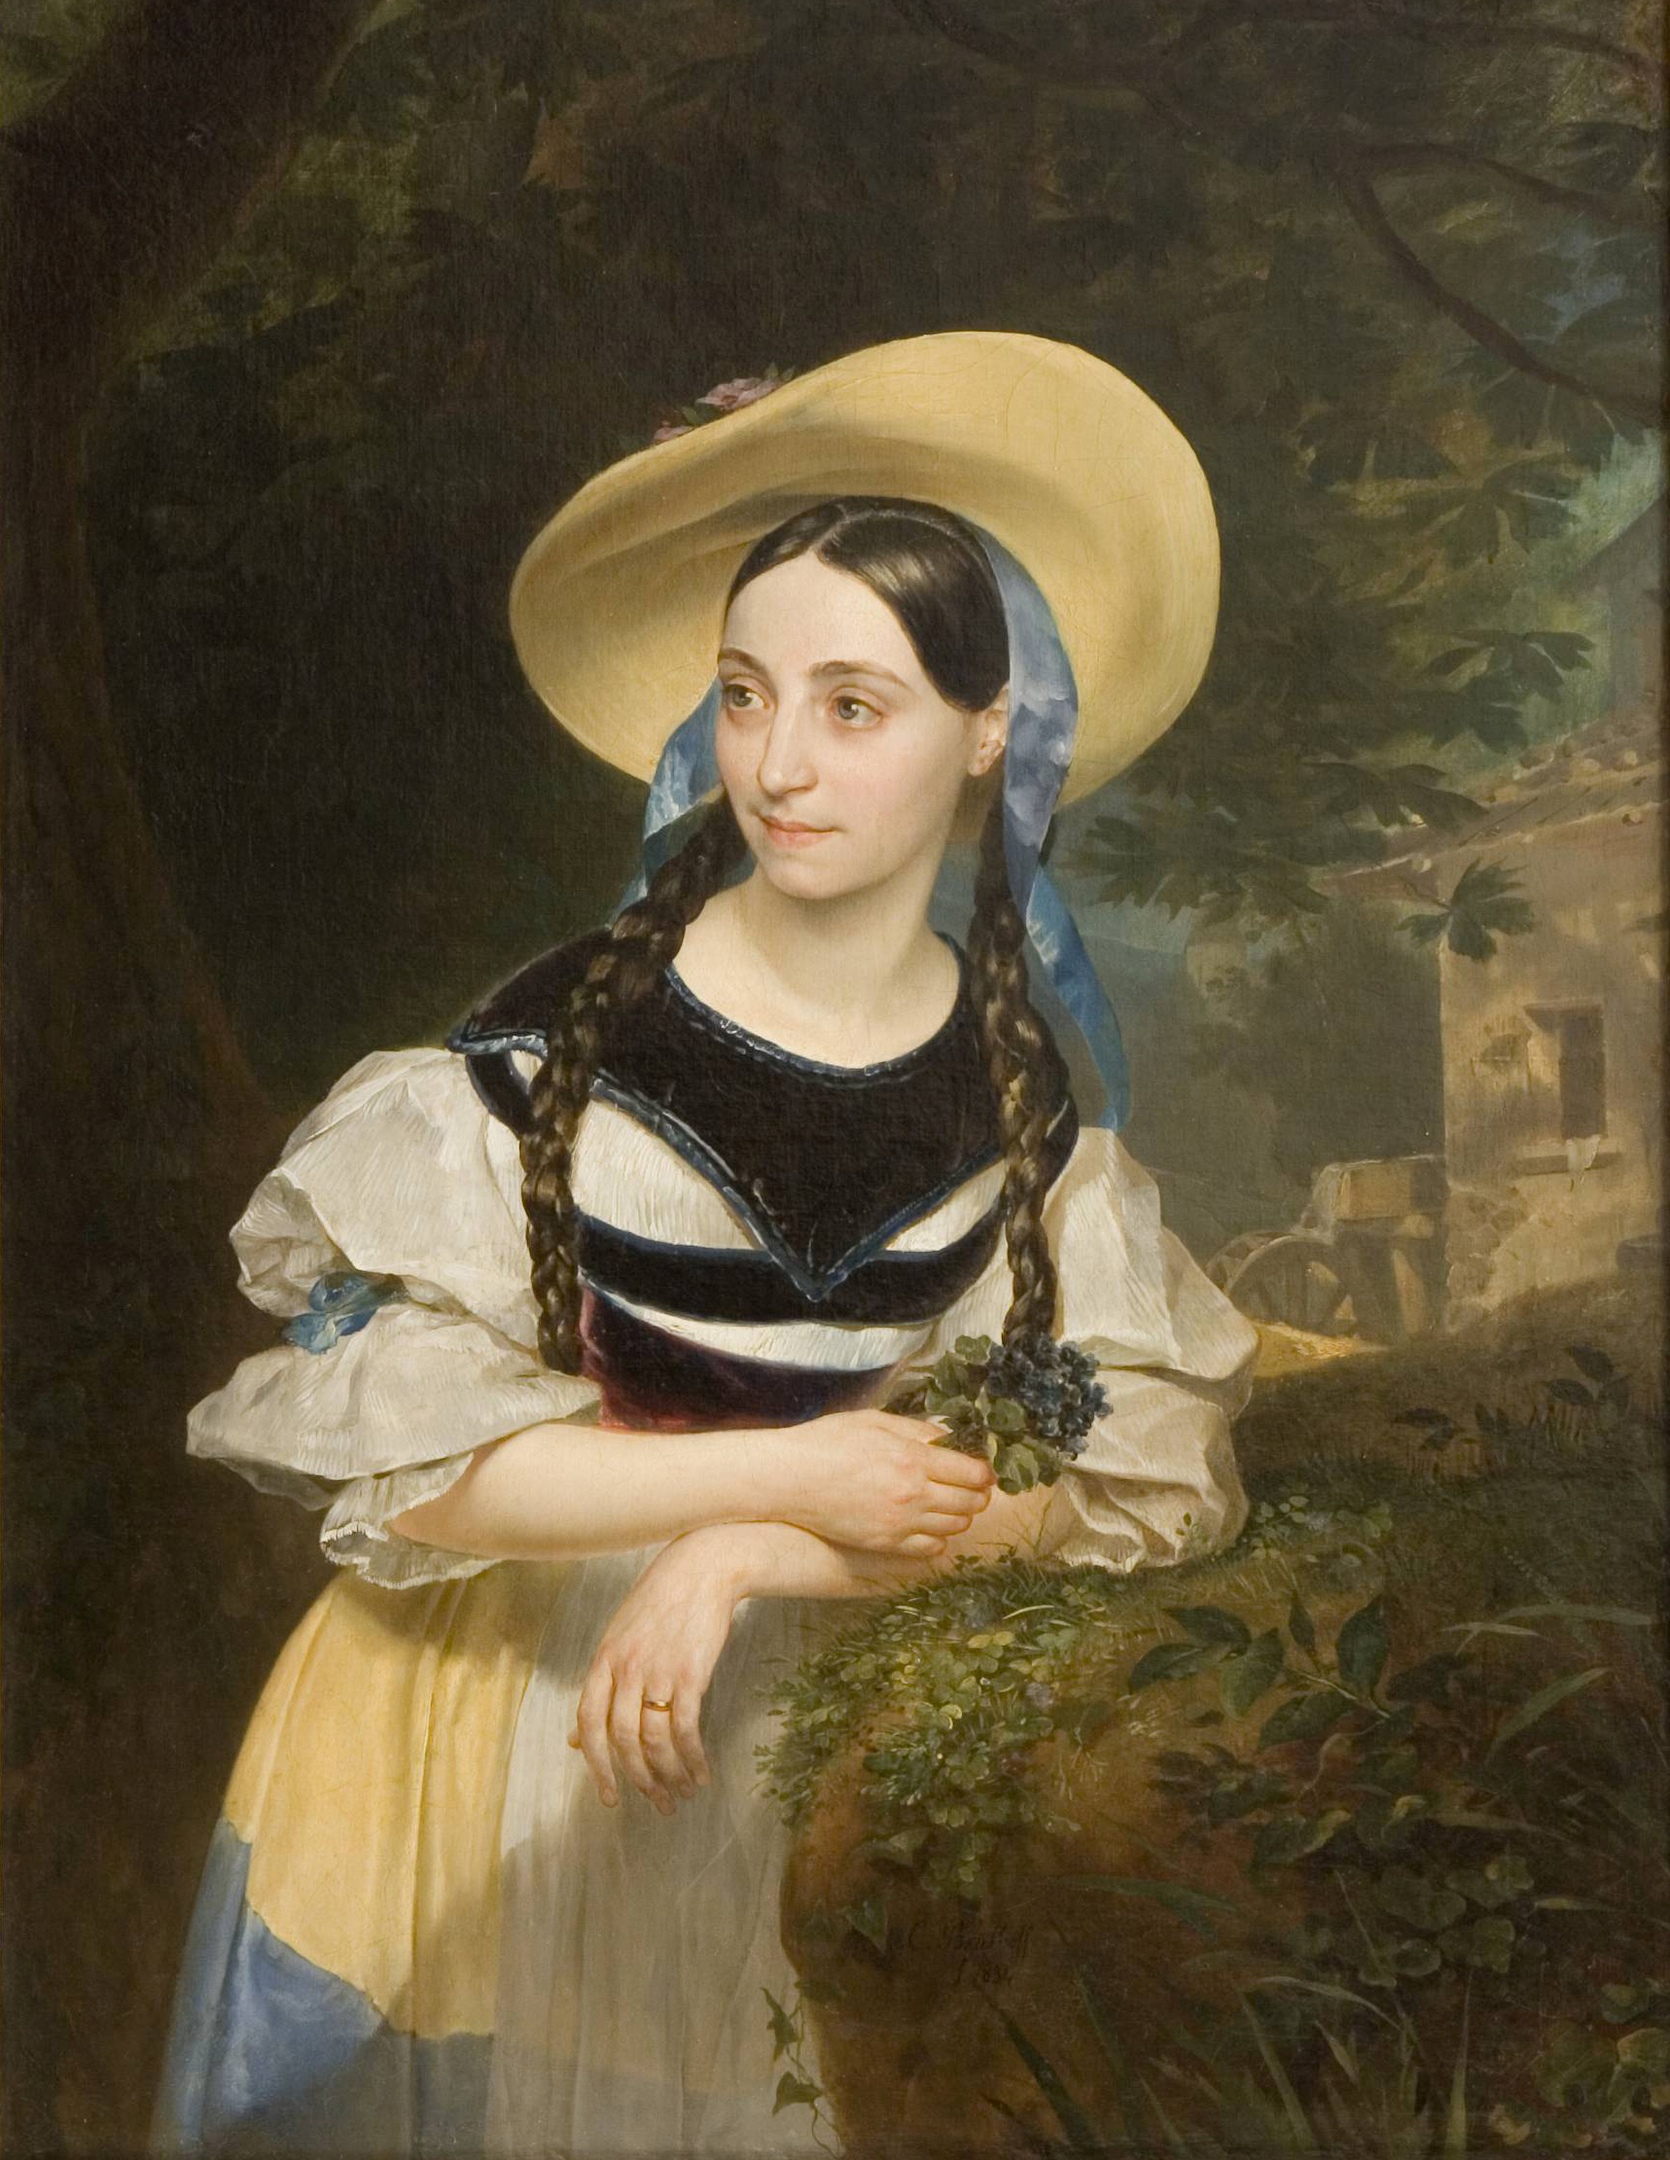 Portrait of Fanny Persiani-Tacchinardi as Amina by Karl Bryullov - 1834 Scientific Research Museum of the Russian Academy of Fine Arts